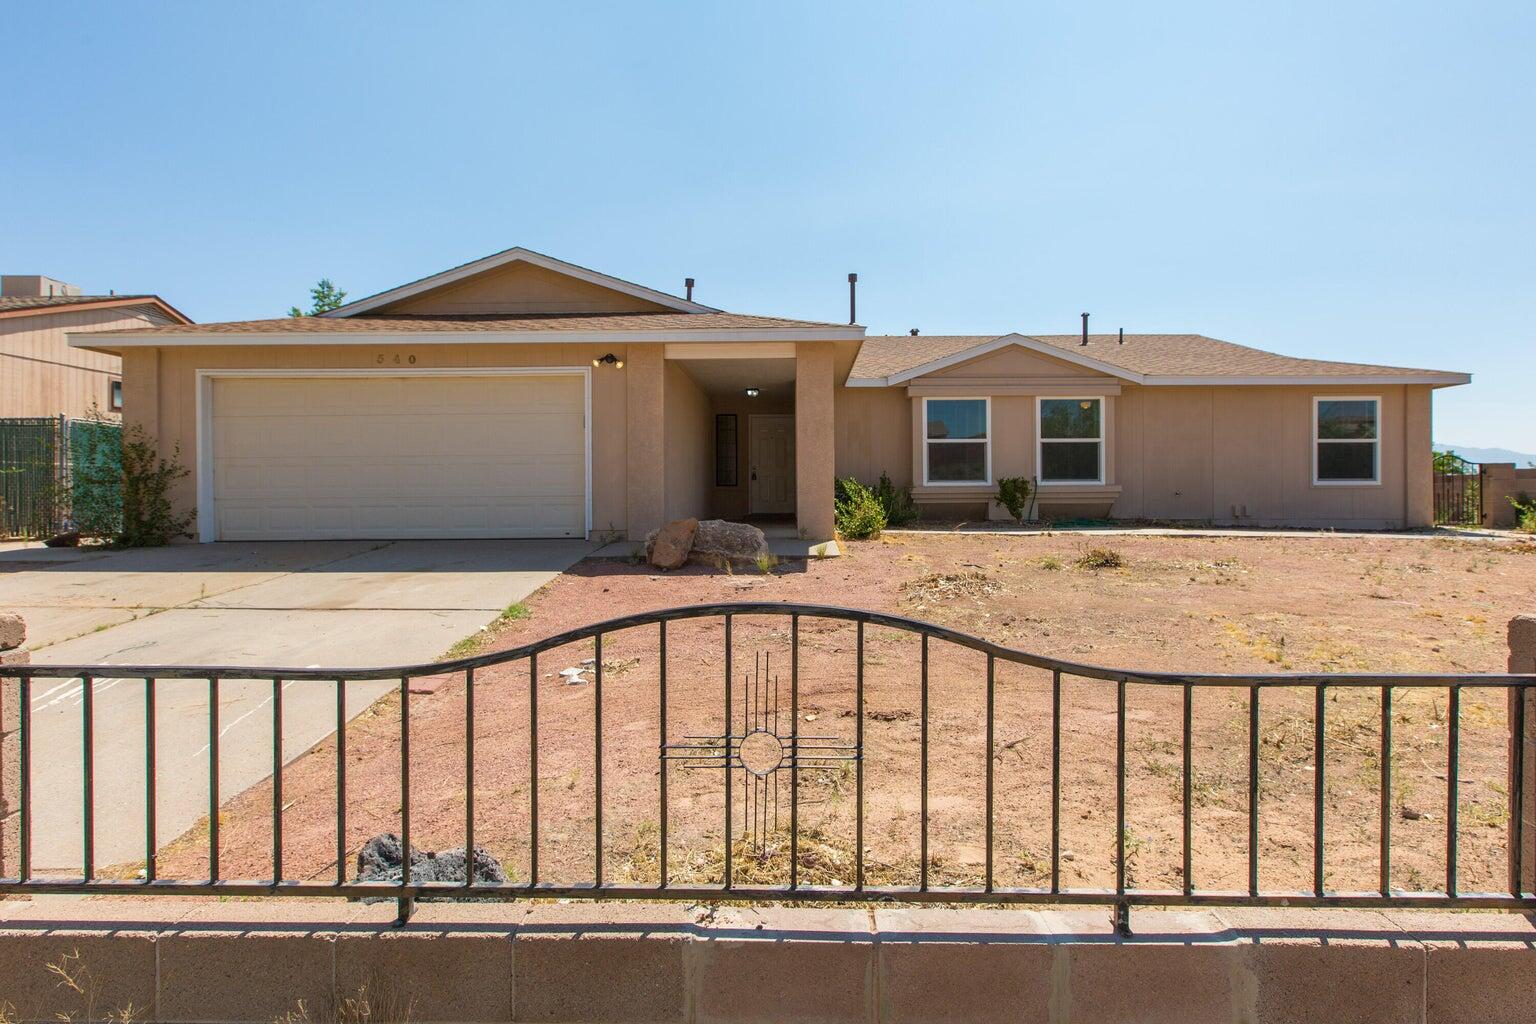 Excellent opportunity to own this well maintained 4 bed 2 bath home with a pool. Home is light and bright and has a large backyard with a patio off the dining area and access to the back yard from the oversized master bedroom!